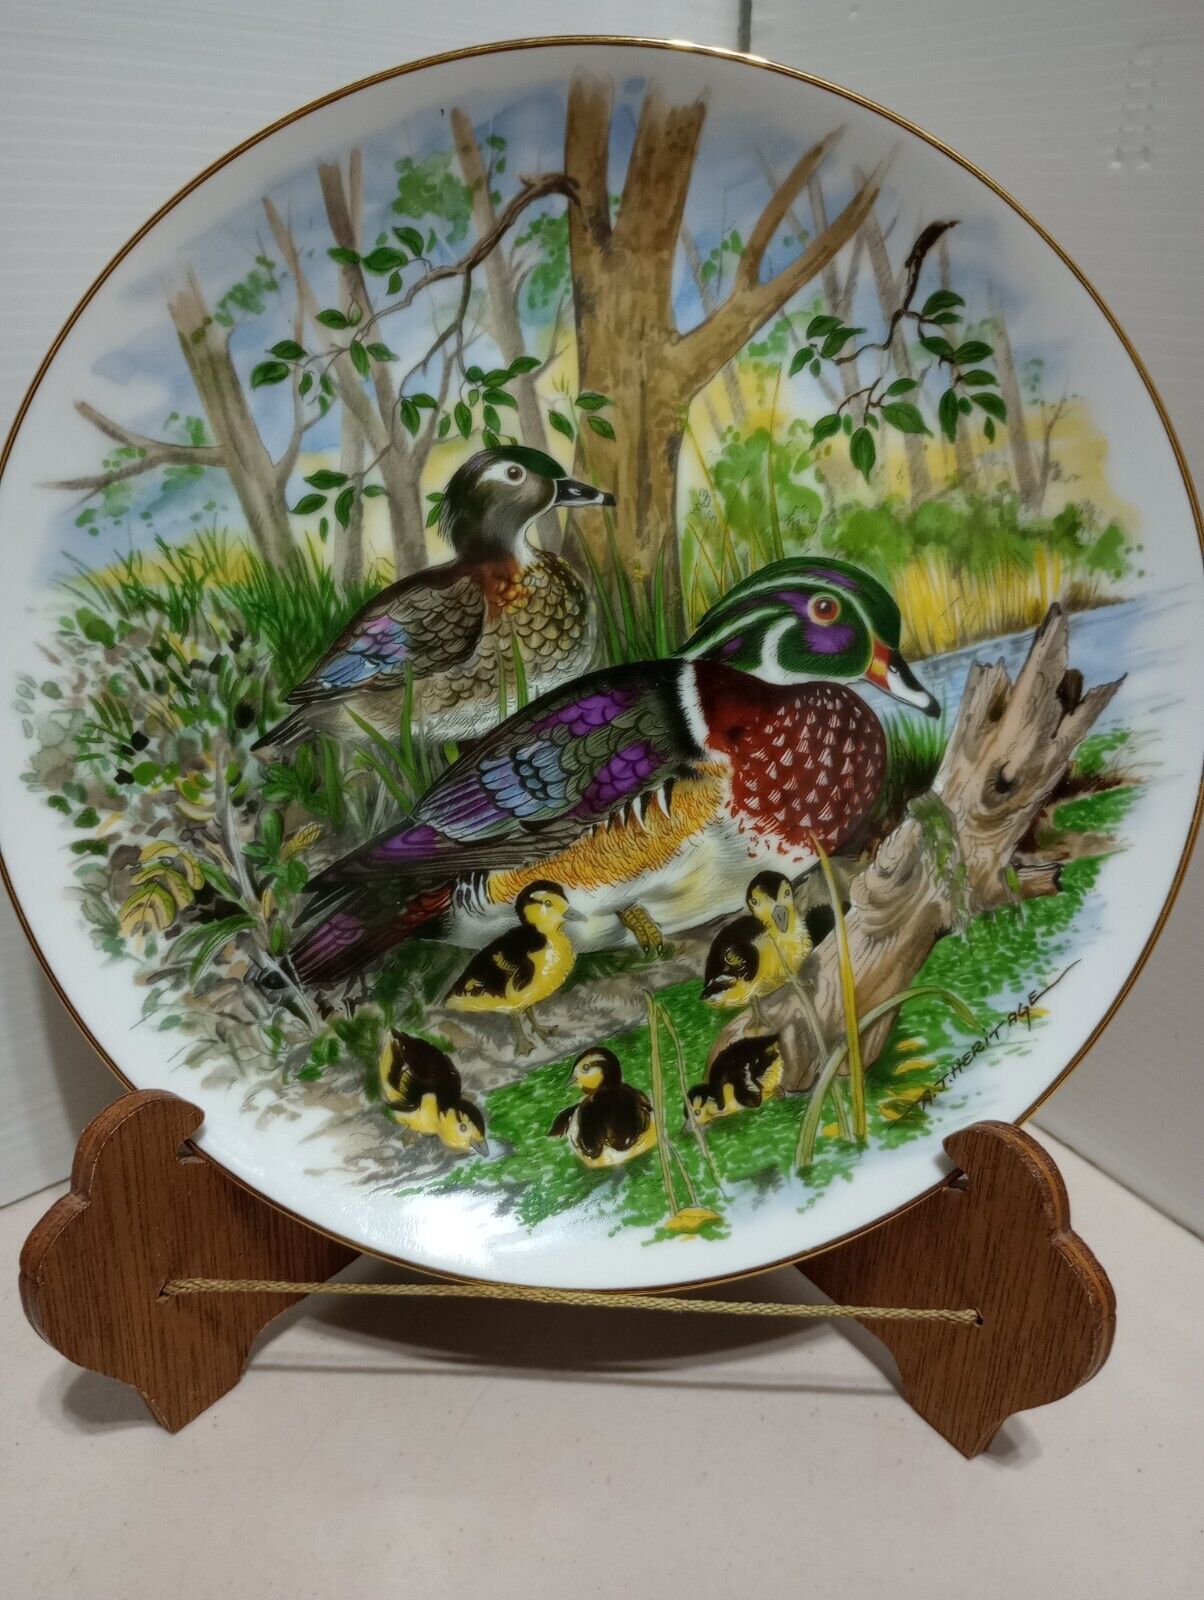 Wood Duck Game Birds of the South by Southern Living Gallery 1982 Plate # 15114